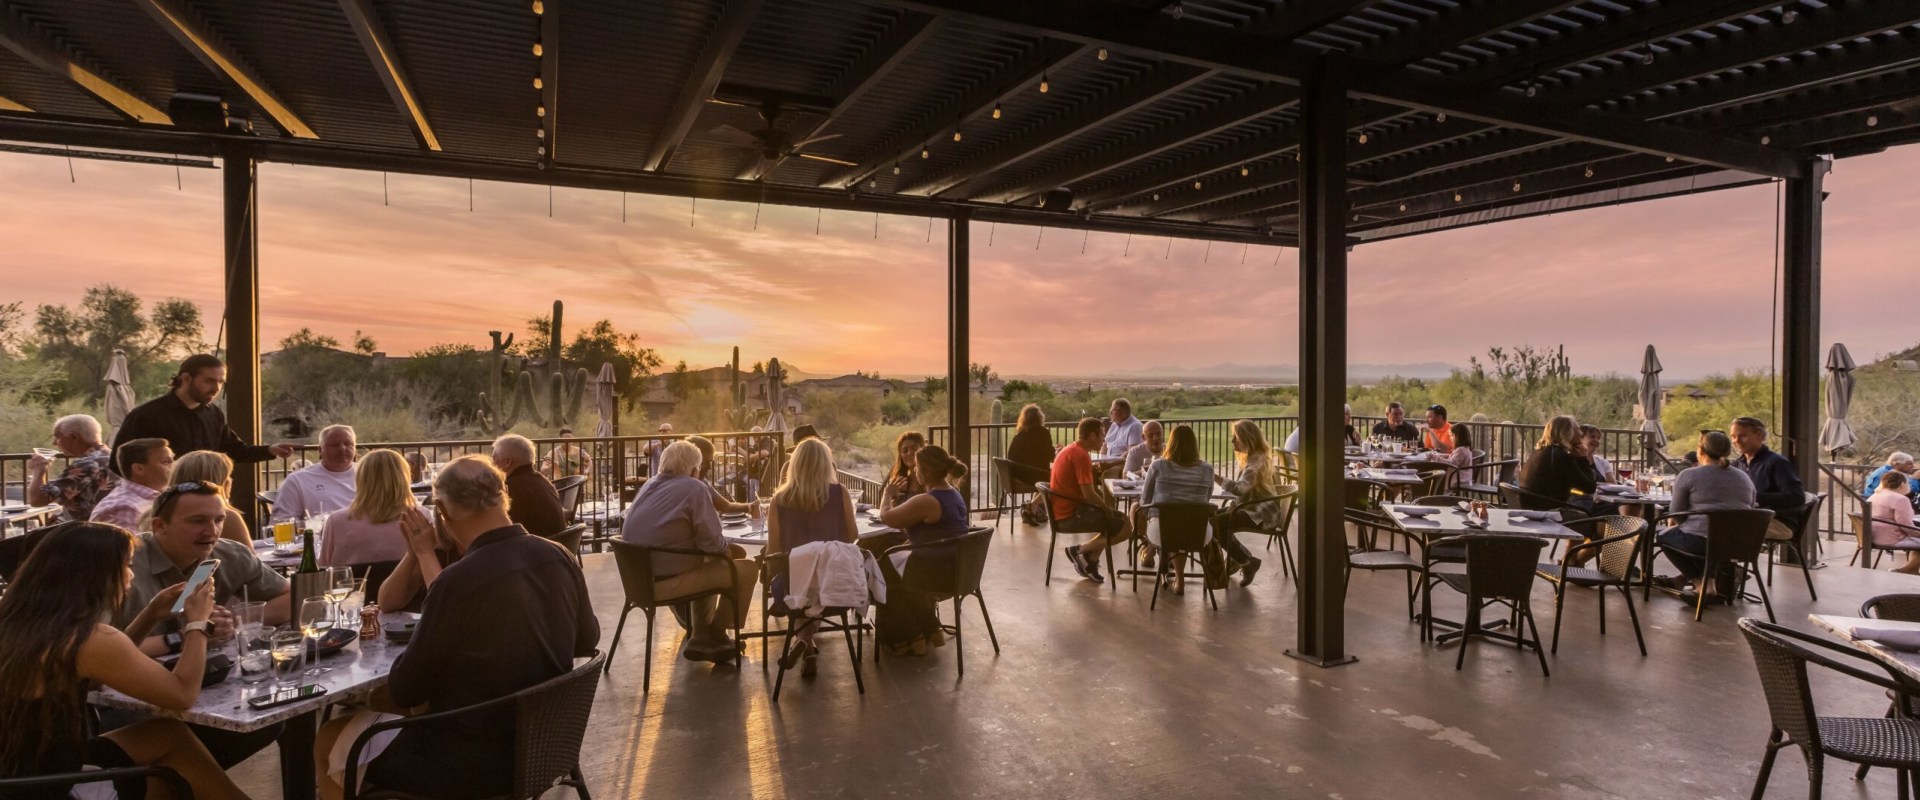 The Best Wine Bars in Chandler, AZ for Outdoor Seating and Heaters